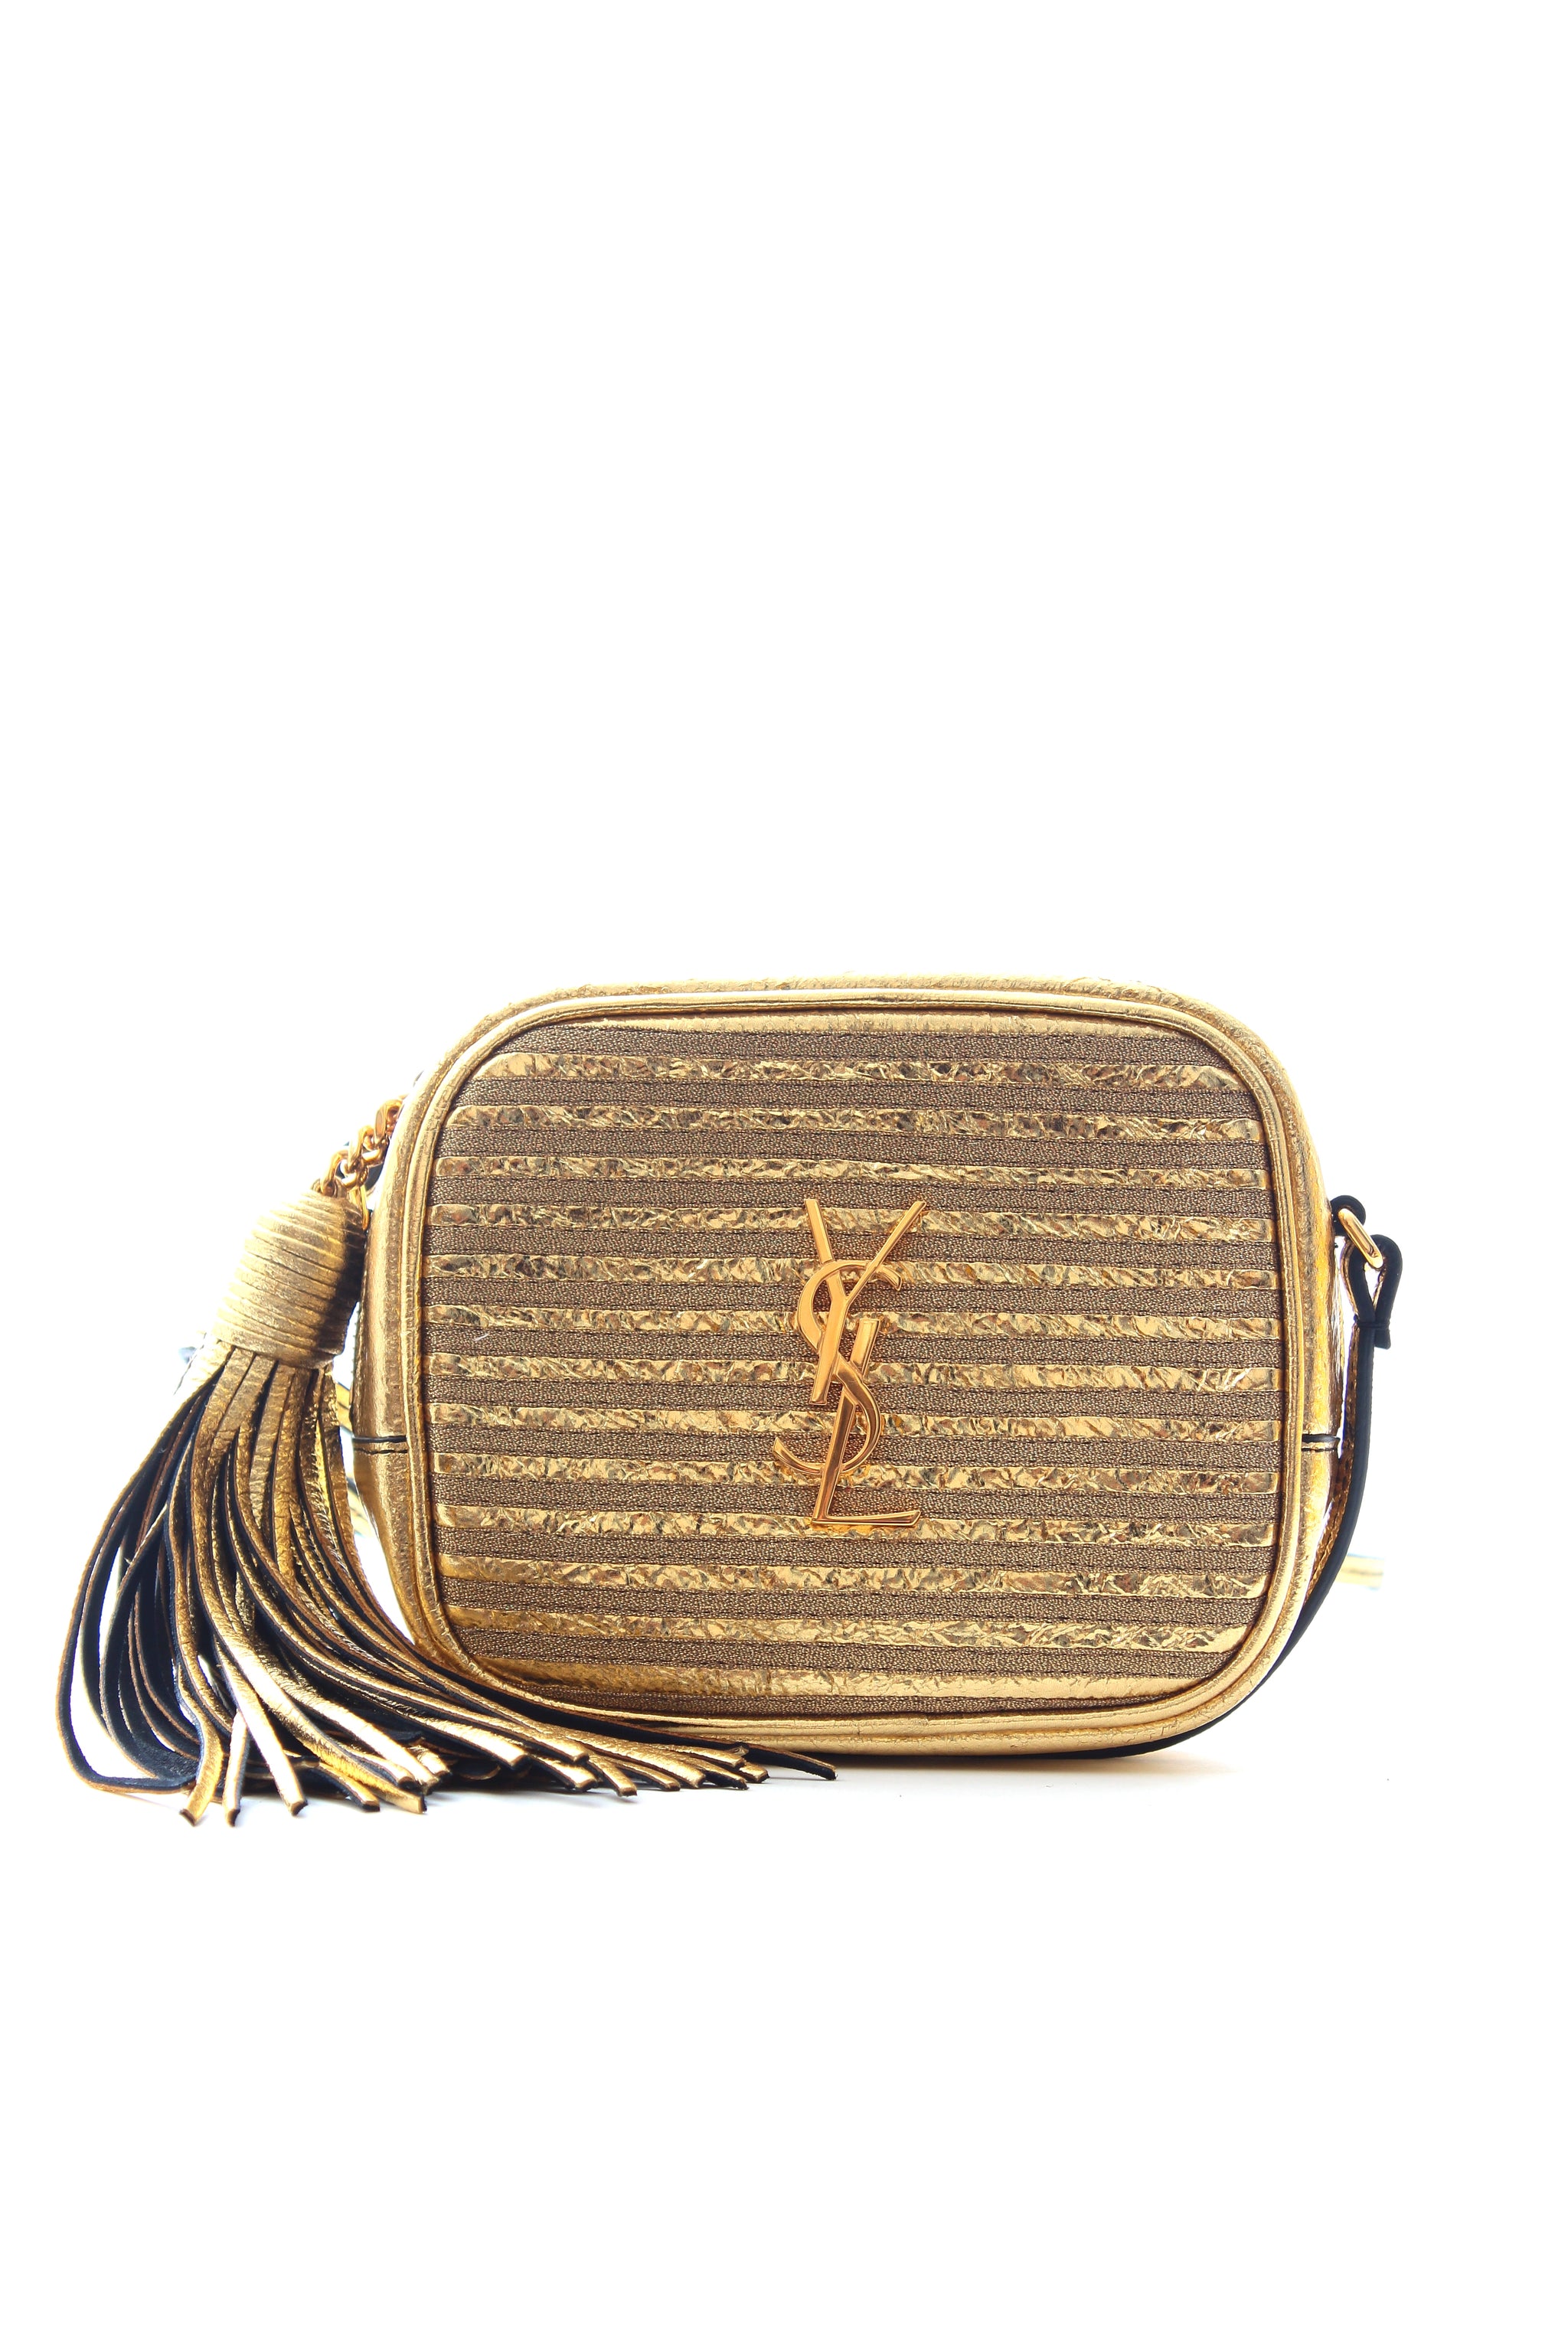 YSL Python-effect Leather Gold Handbag/Clutch (Original), Women's Fashion,  Bags & Wallets, Purses & Pouches on Carousell